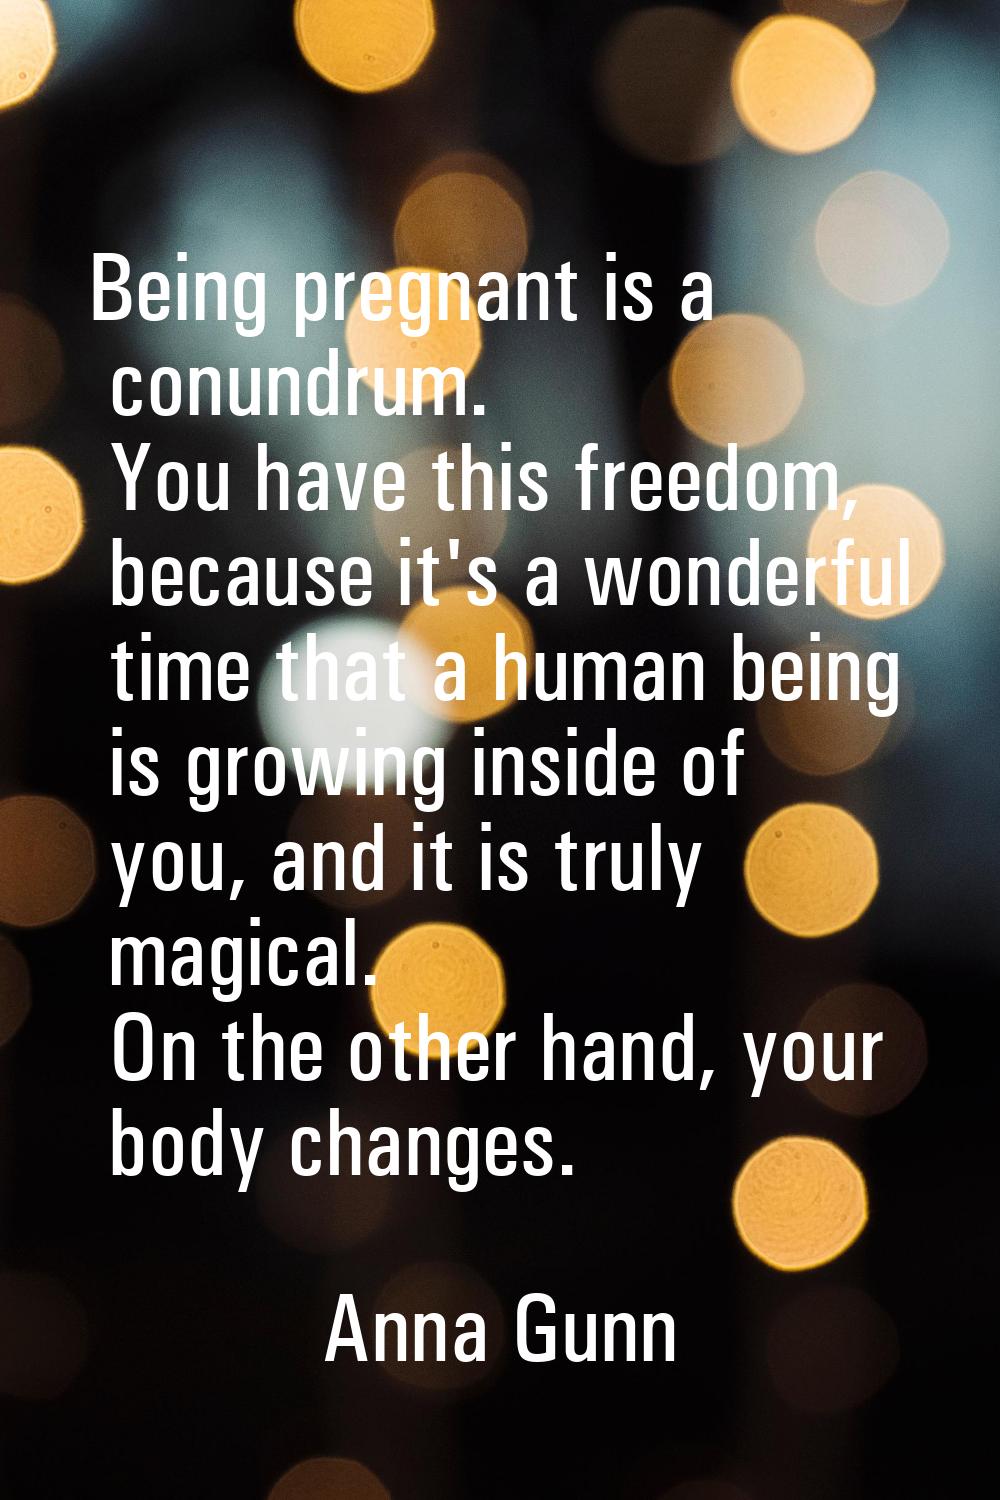 Being pregnant is a conundrum. You have this freedom, because it's a wonderful time that a human be